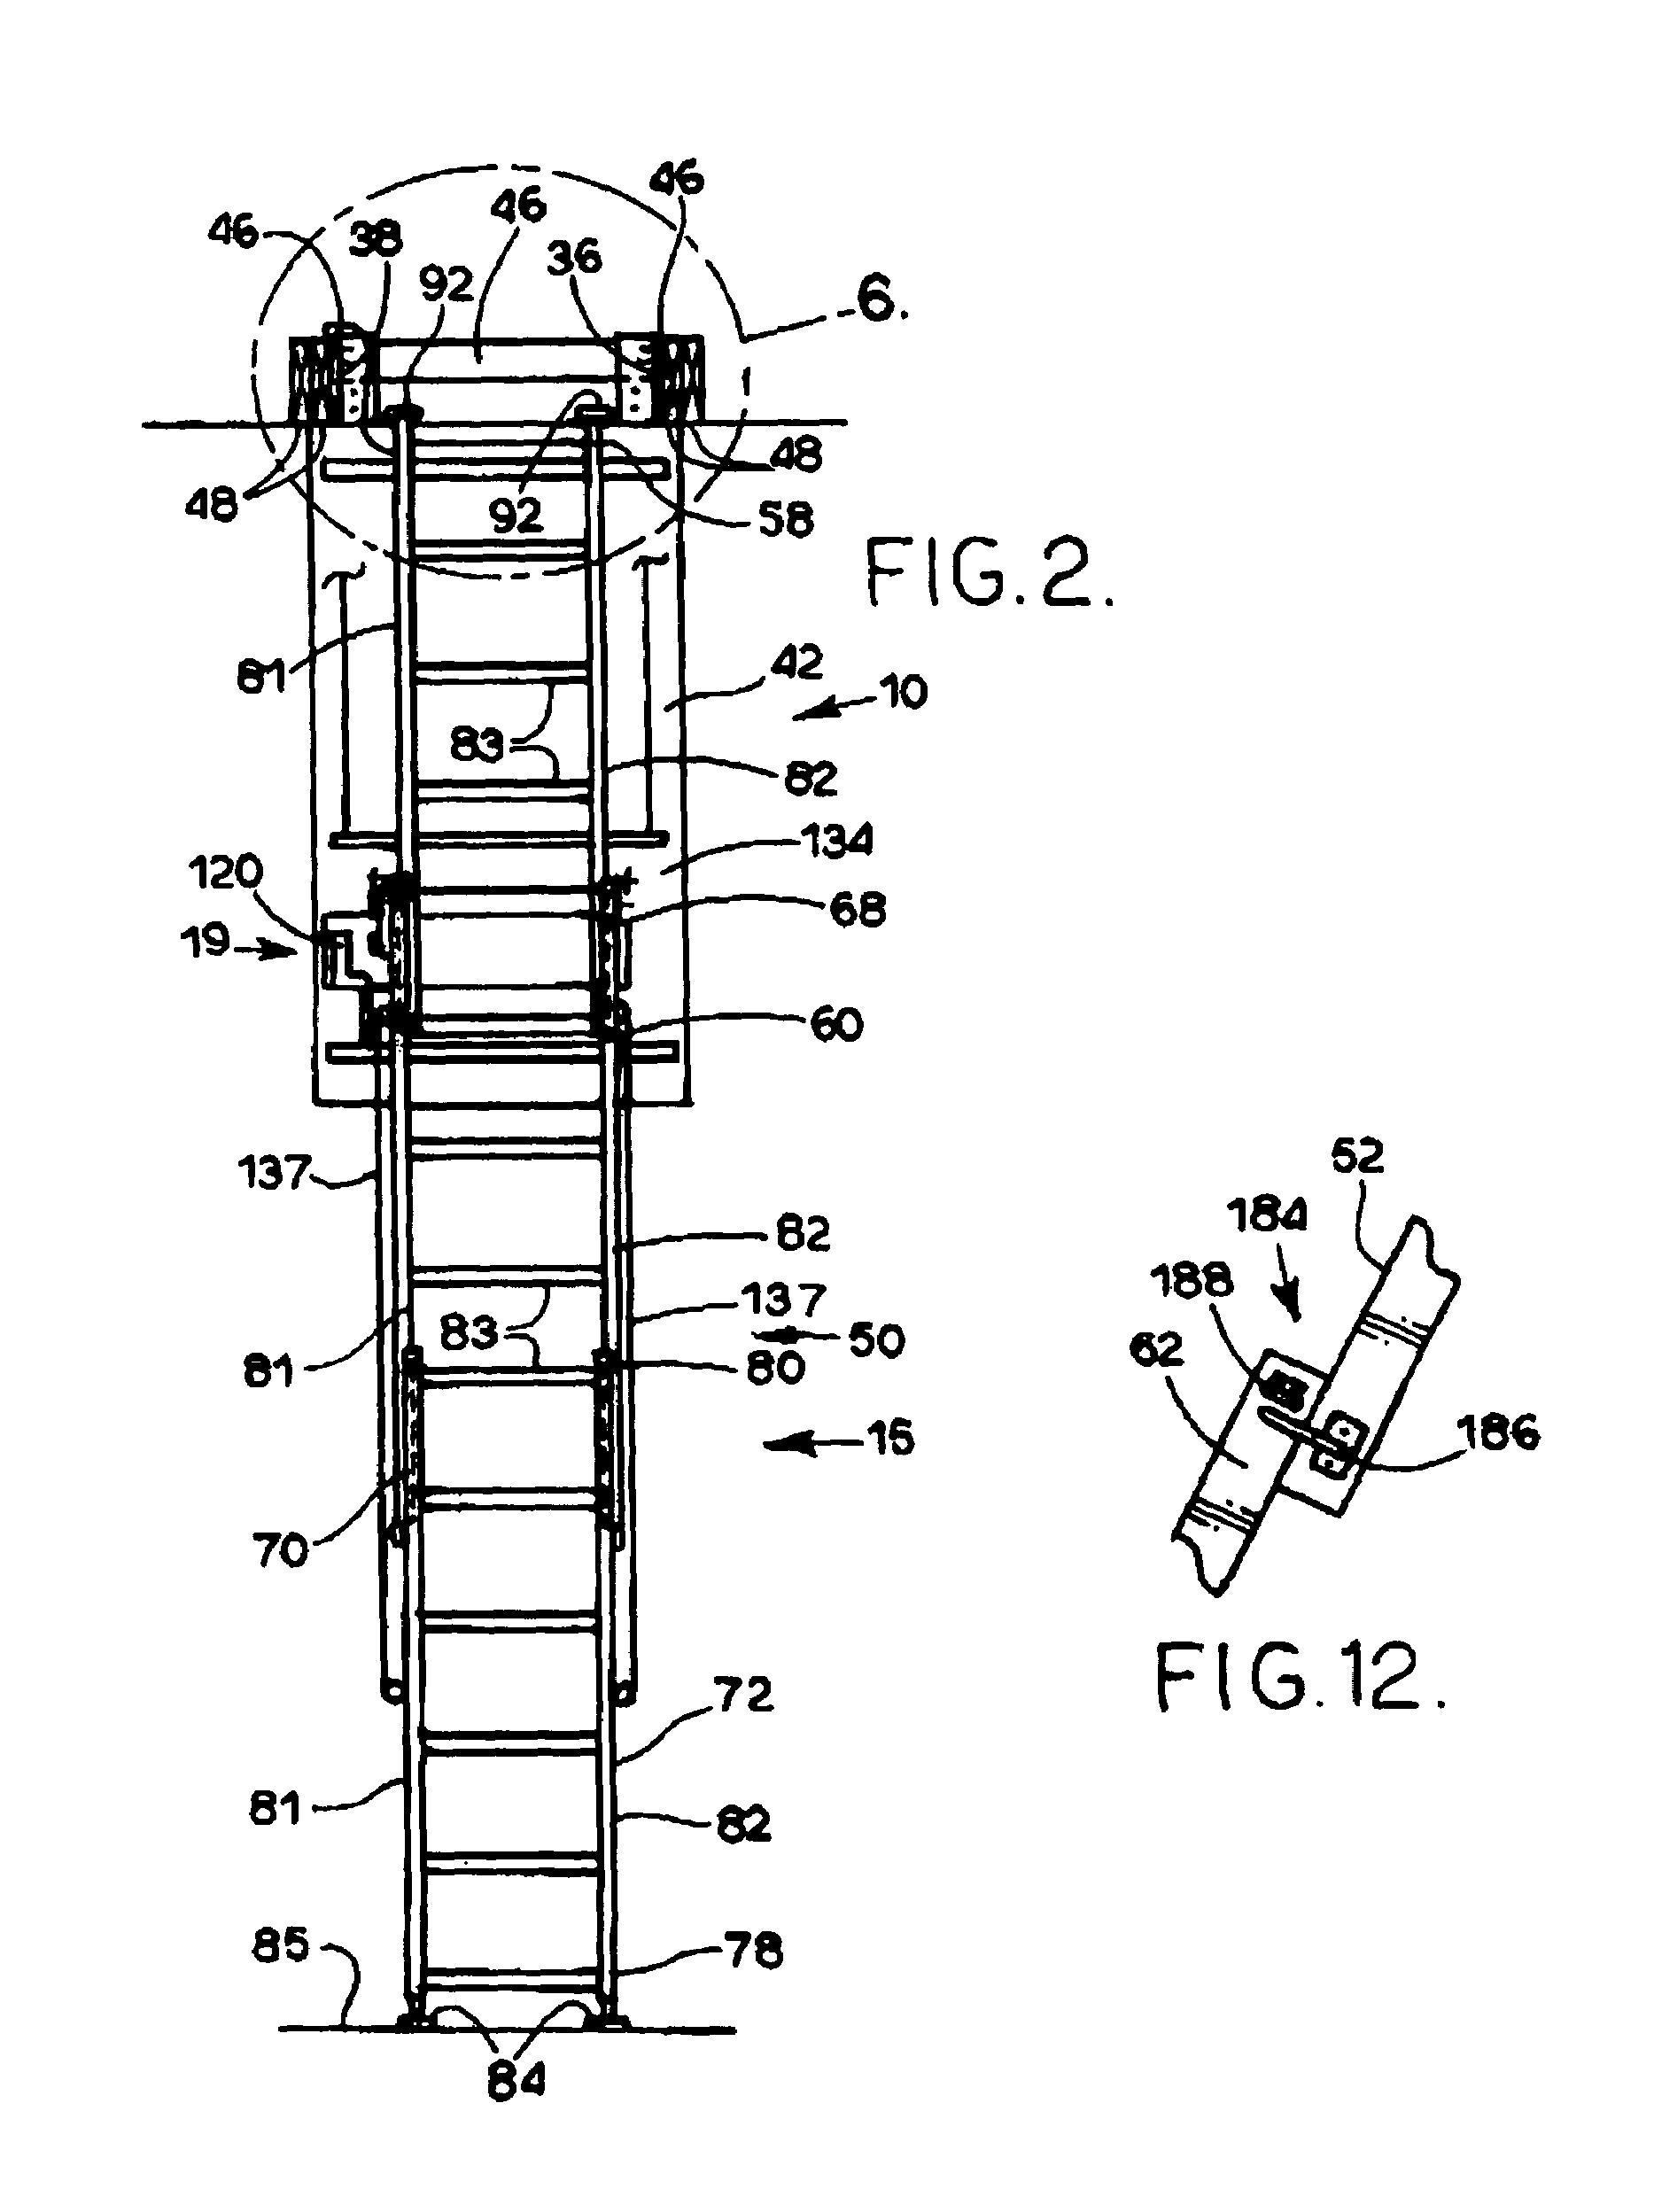 Motorized access ladder for elevated areas